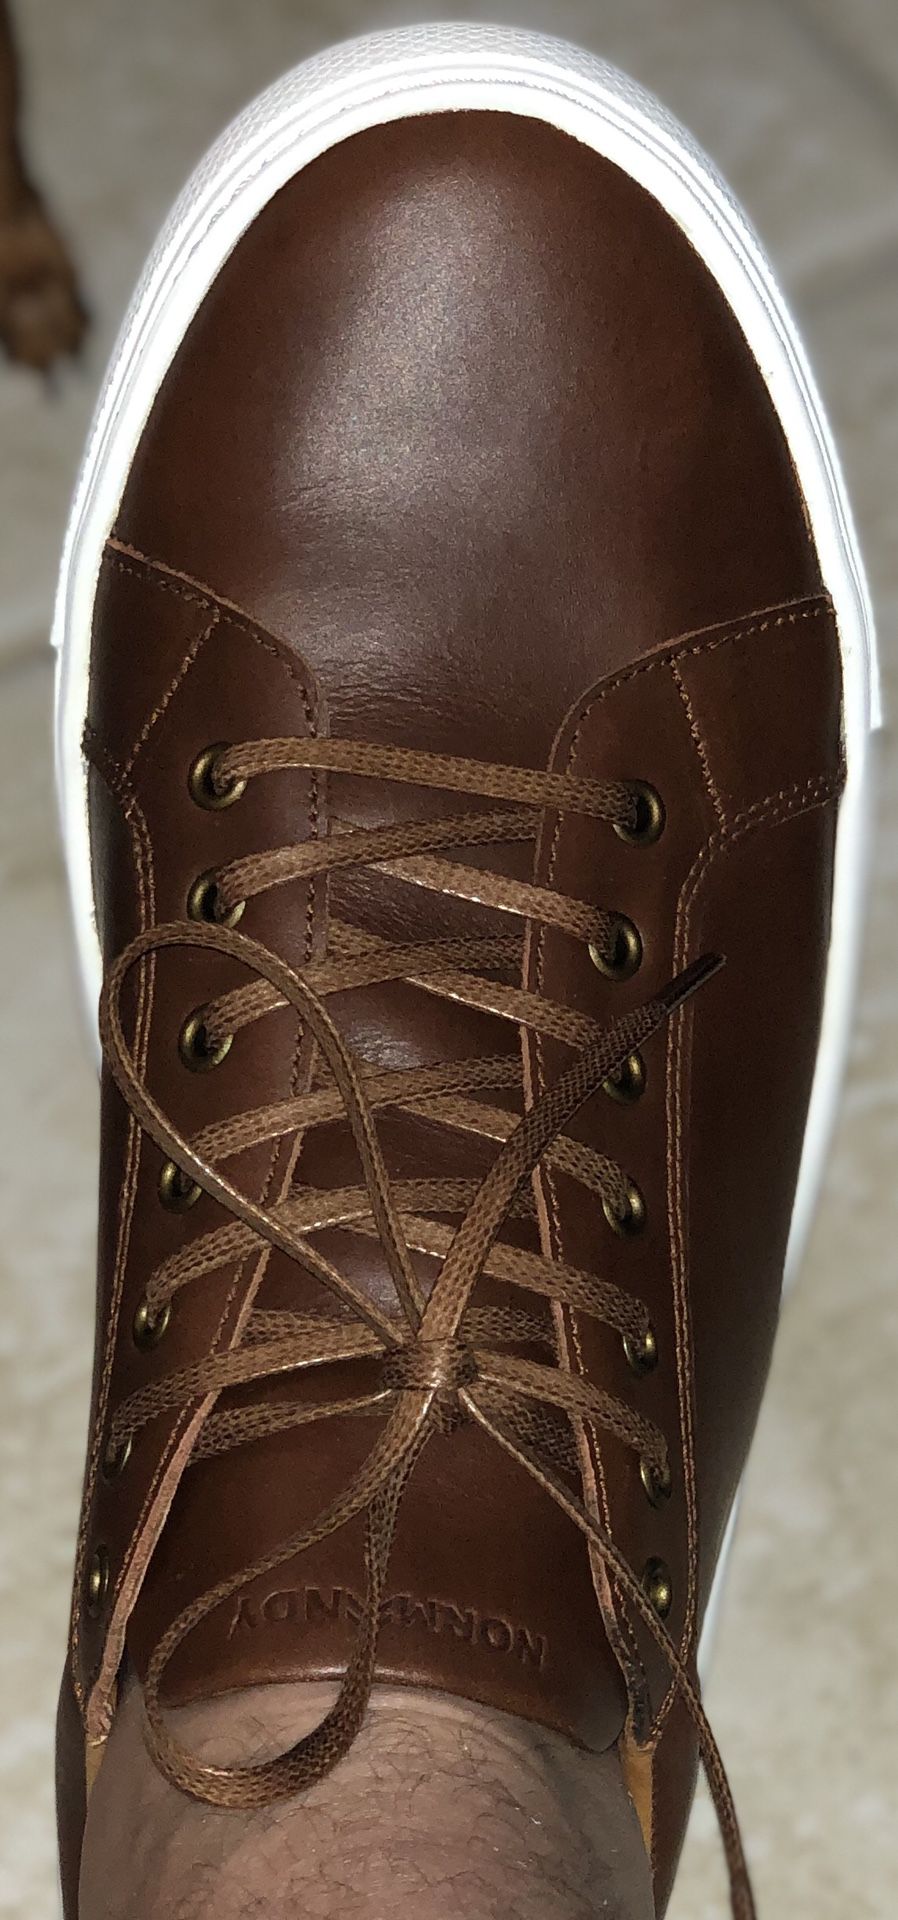 Direct from MANUFACTURER Brand New Authentic Handcrafted “LEO FRATTINI’S” REAL NATURAL FULL GRAIN LEATHER IN AND OUT. NO TEXTIL. Get them in 3 days